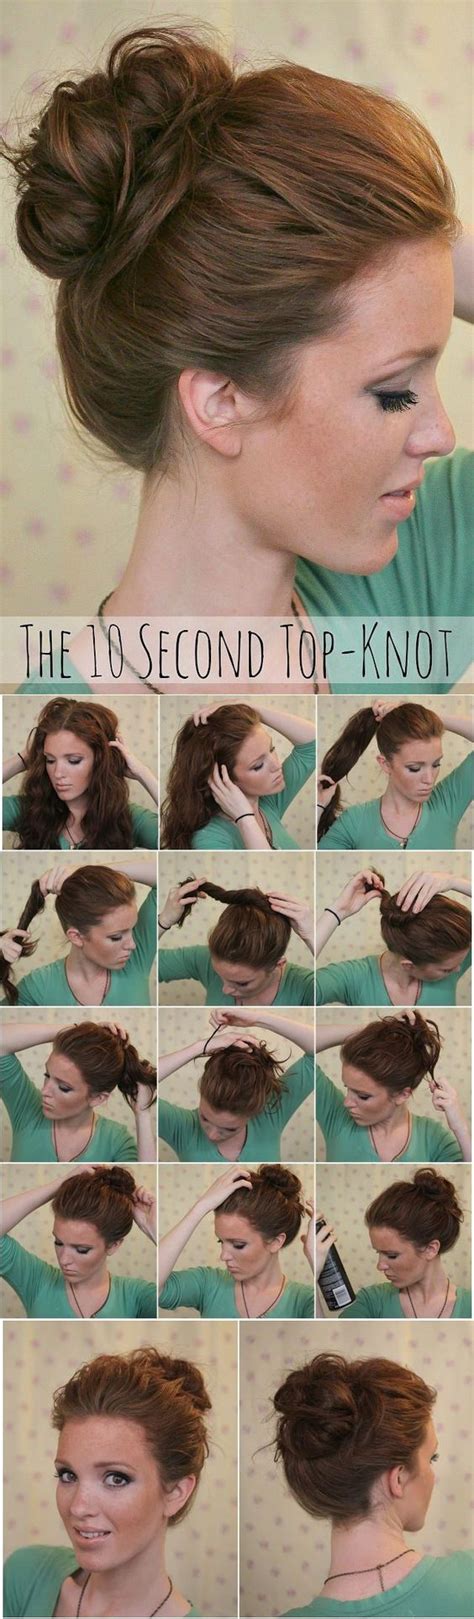 Bun hairstyles are now easy to ace! How to Wear a Messy Bun (With Tutorials ) - Hairstyles Weekly